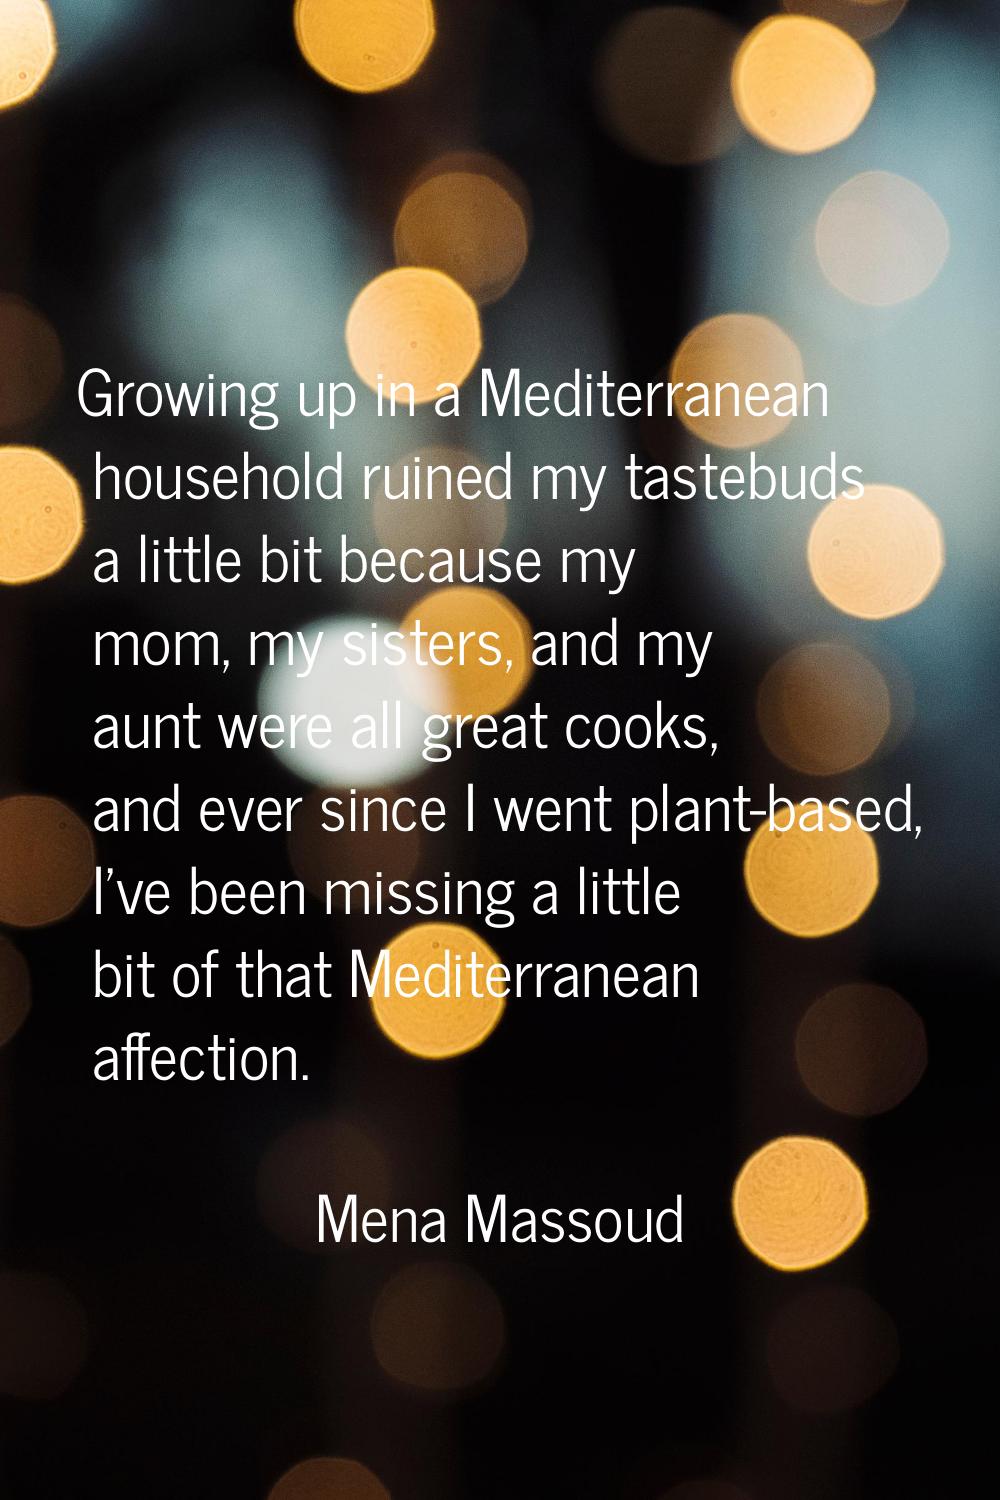 Growing up in a Mediterranean household ruined my tastebuds a little bit because my mom, my sisters